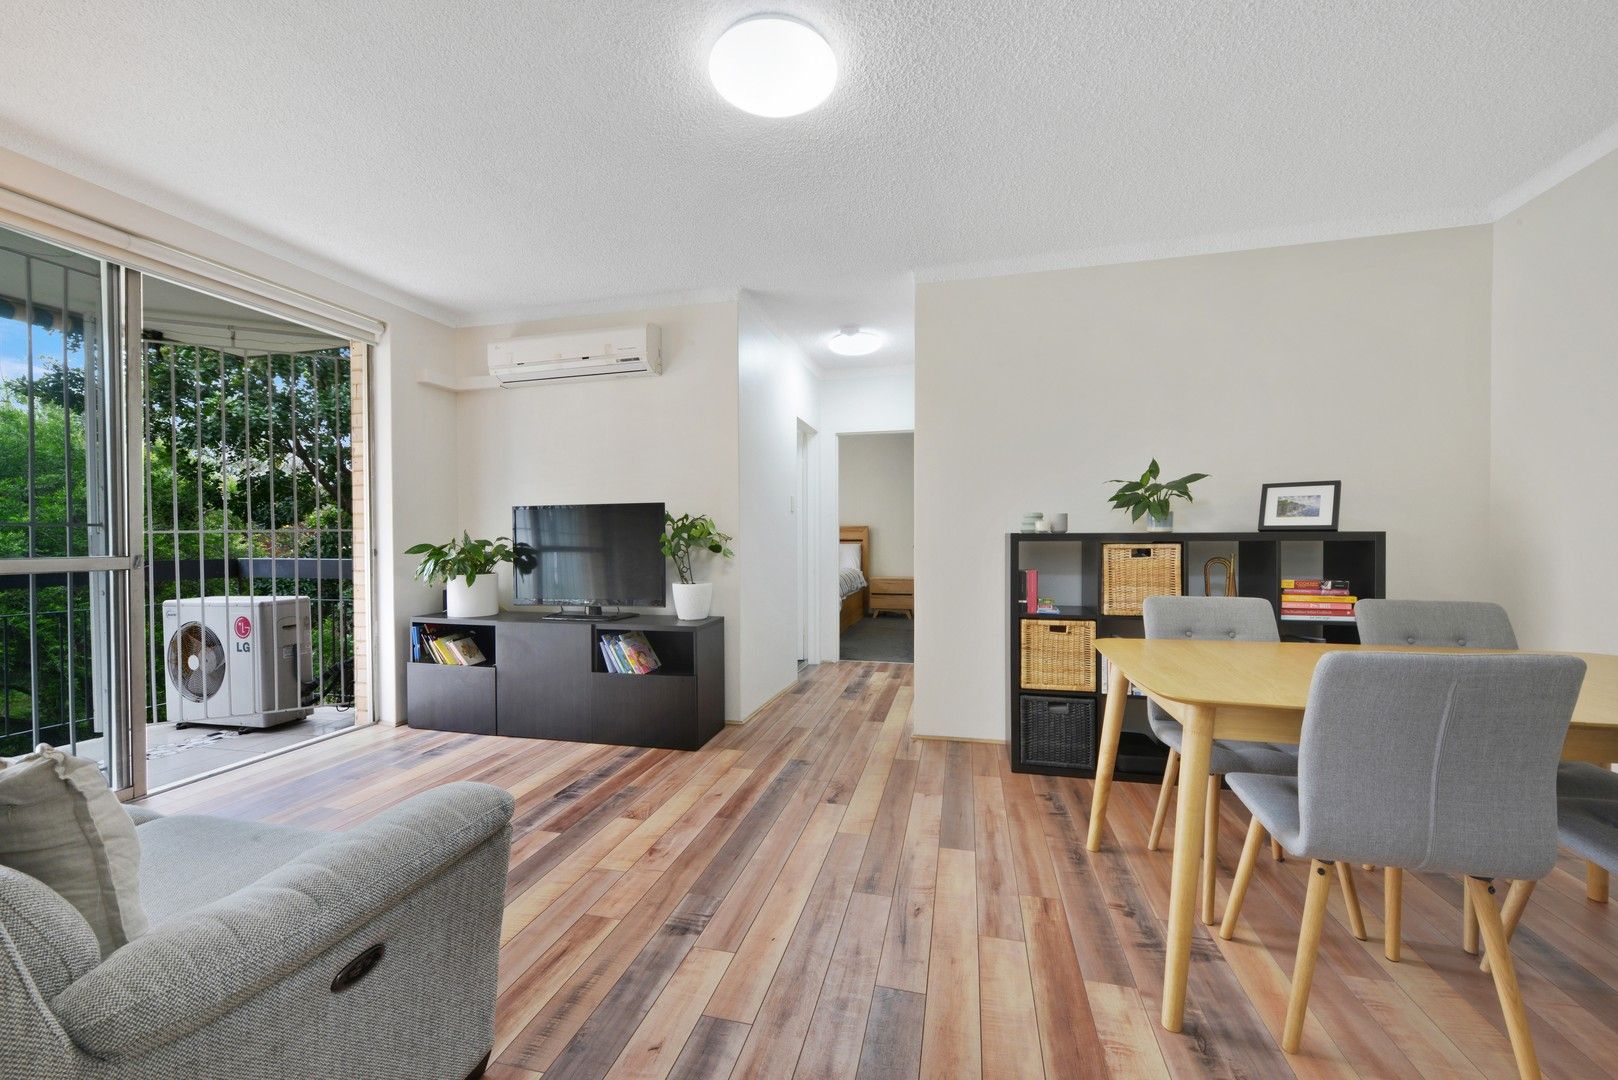 2 bedrooms Apartment / Unit / Flat in 26/6 Middlemiss Street ROSEBERY NSW, 2018